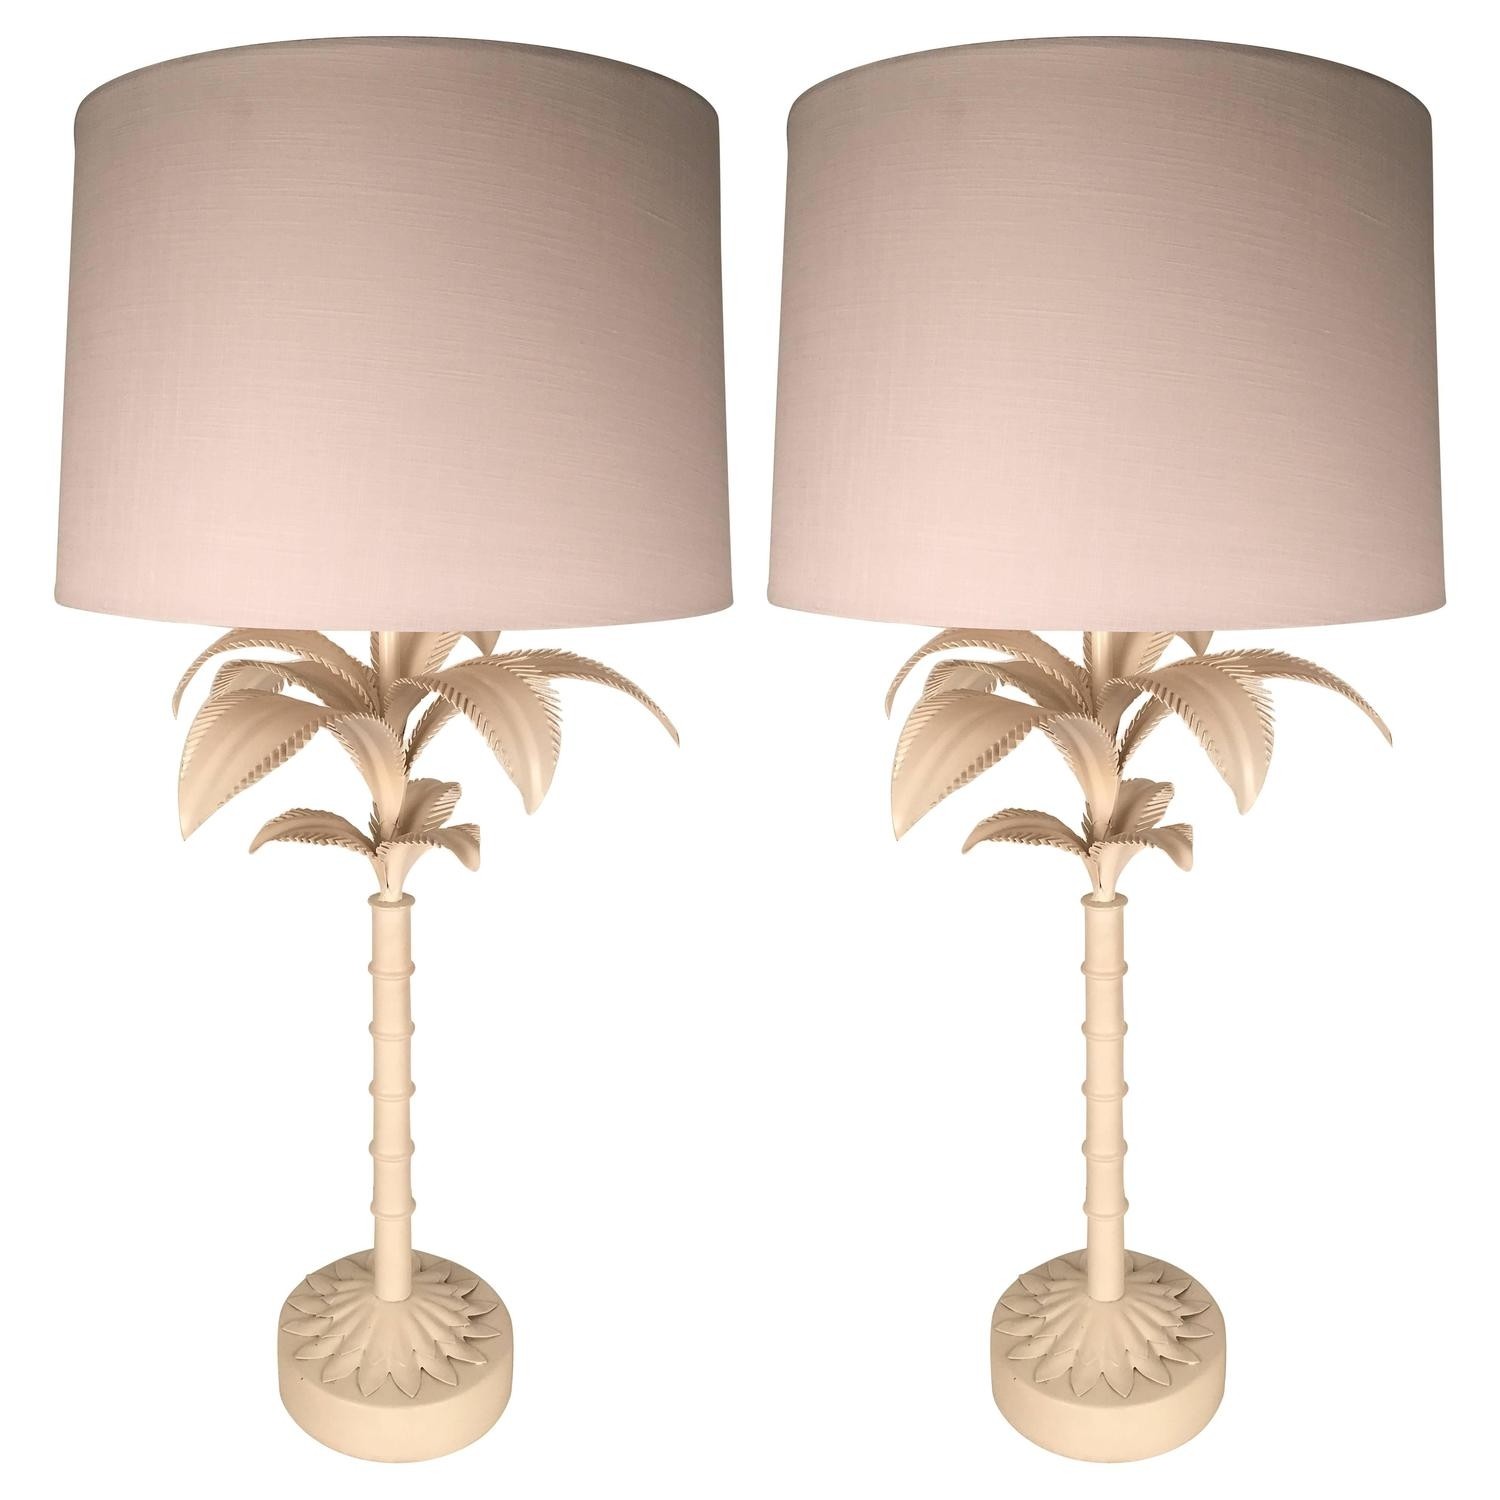 Pair of large palm tree table lamps for sale at